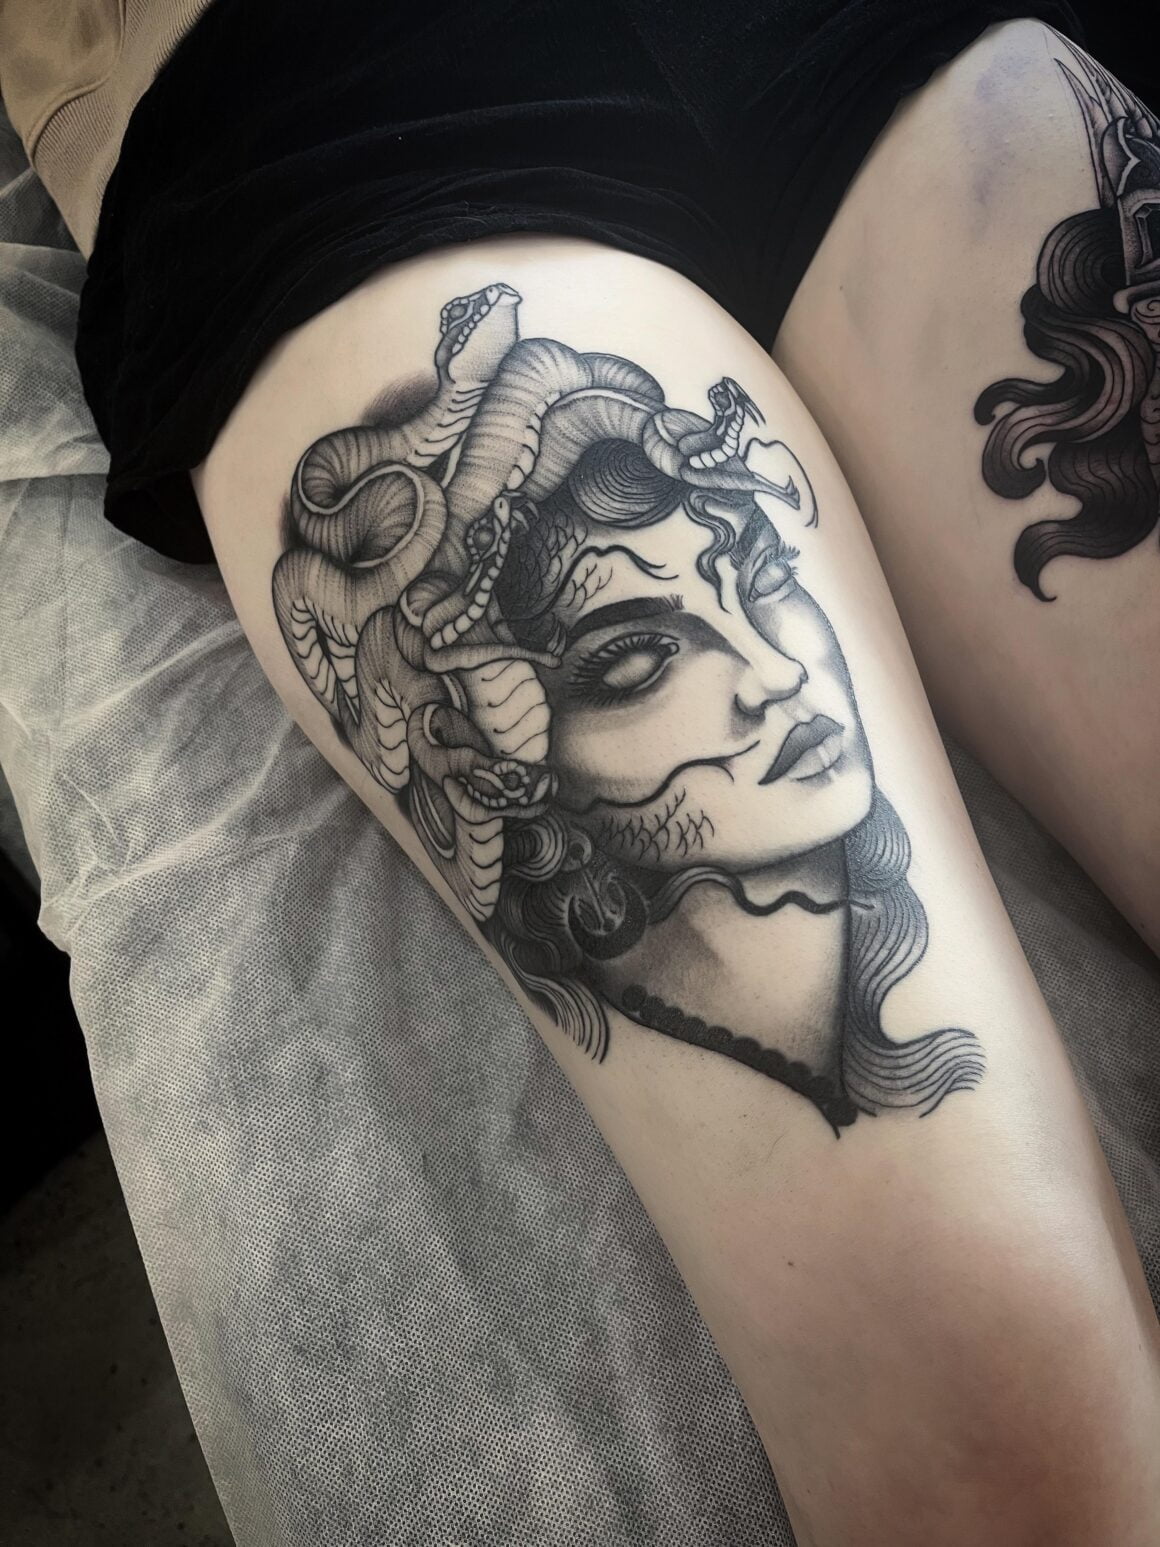 Medusa Tattoo on my thigh, done by Nick Coon, Flat's Tattooing Inc. Groton,  CT. (Pic taken upside down lol) : r/tattoos